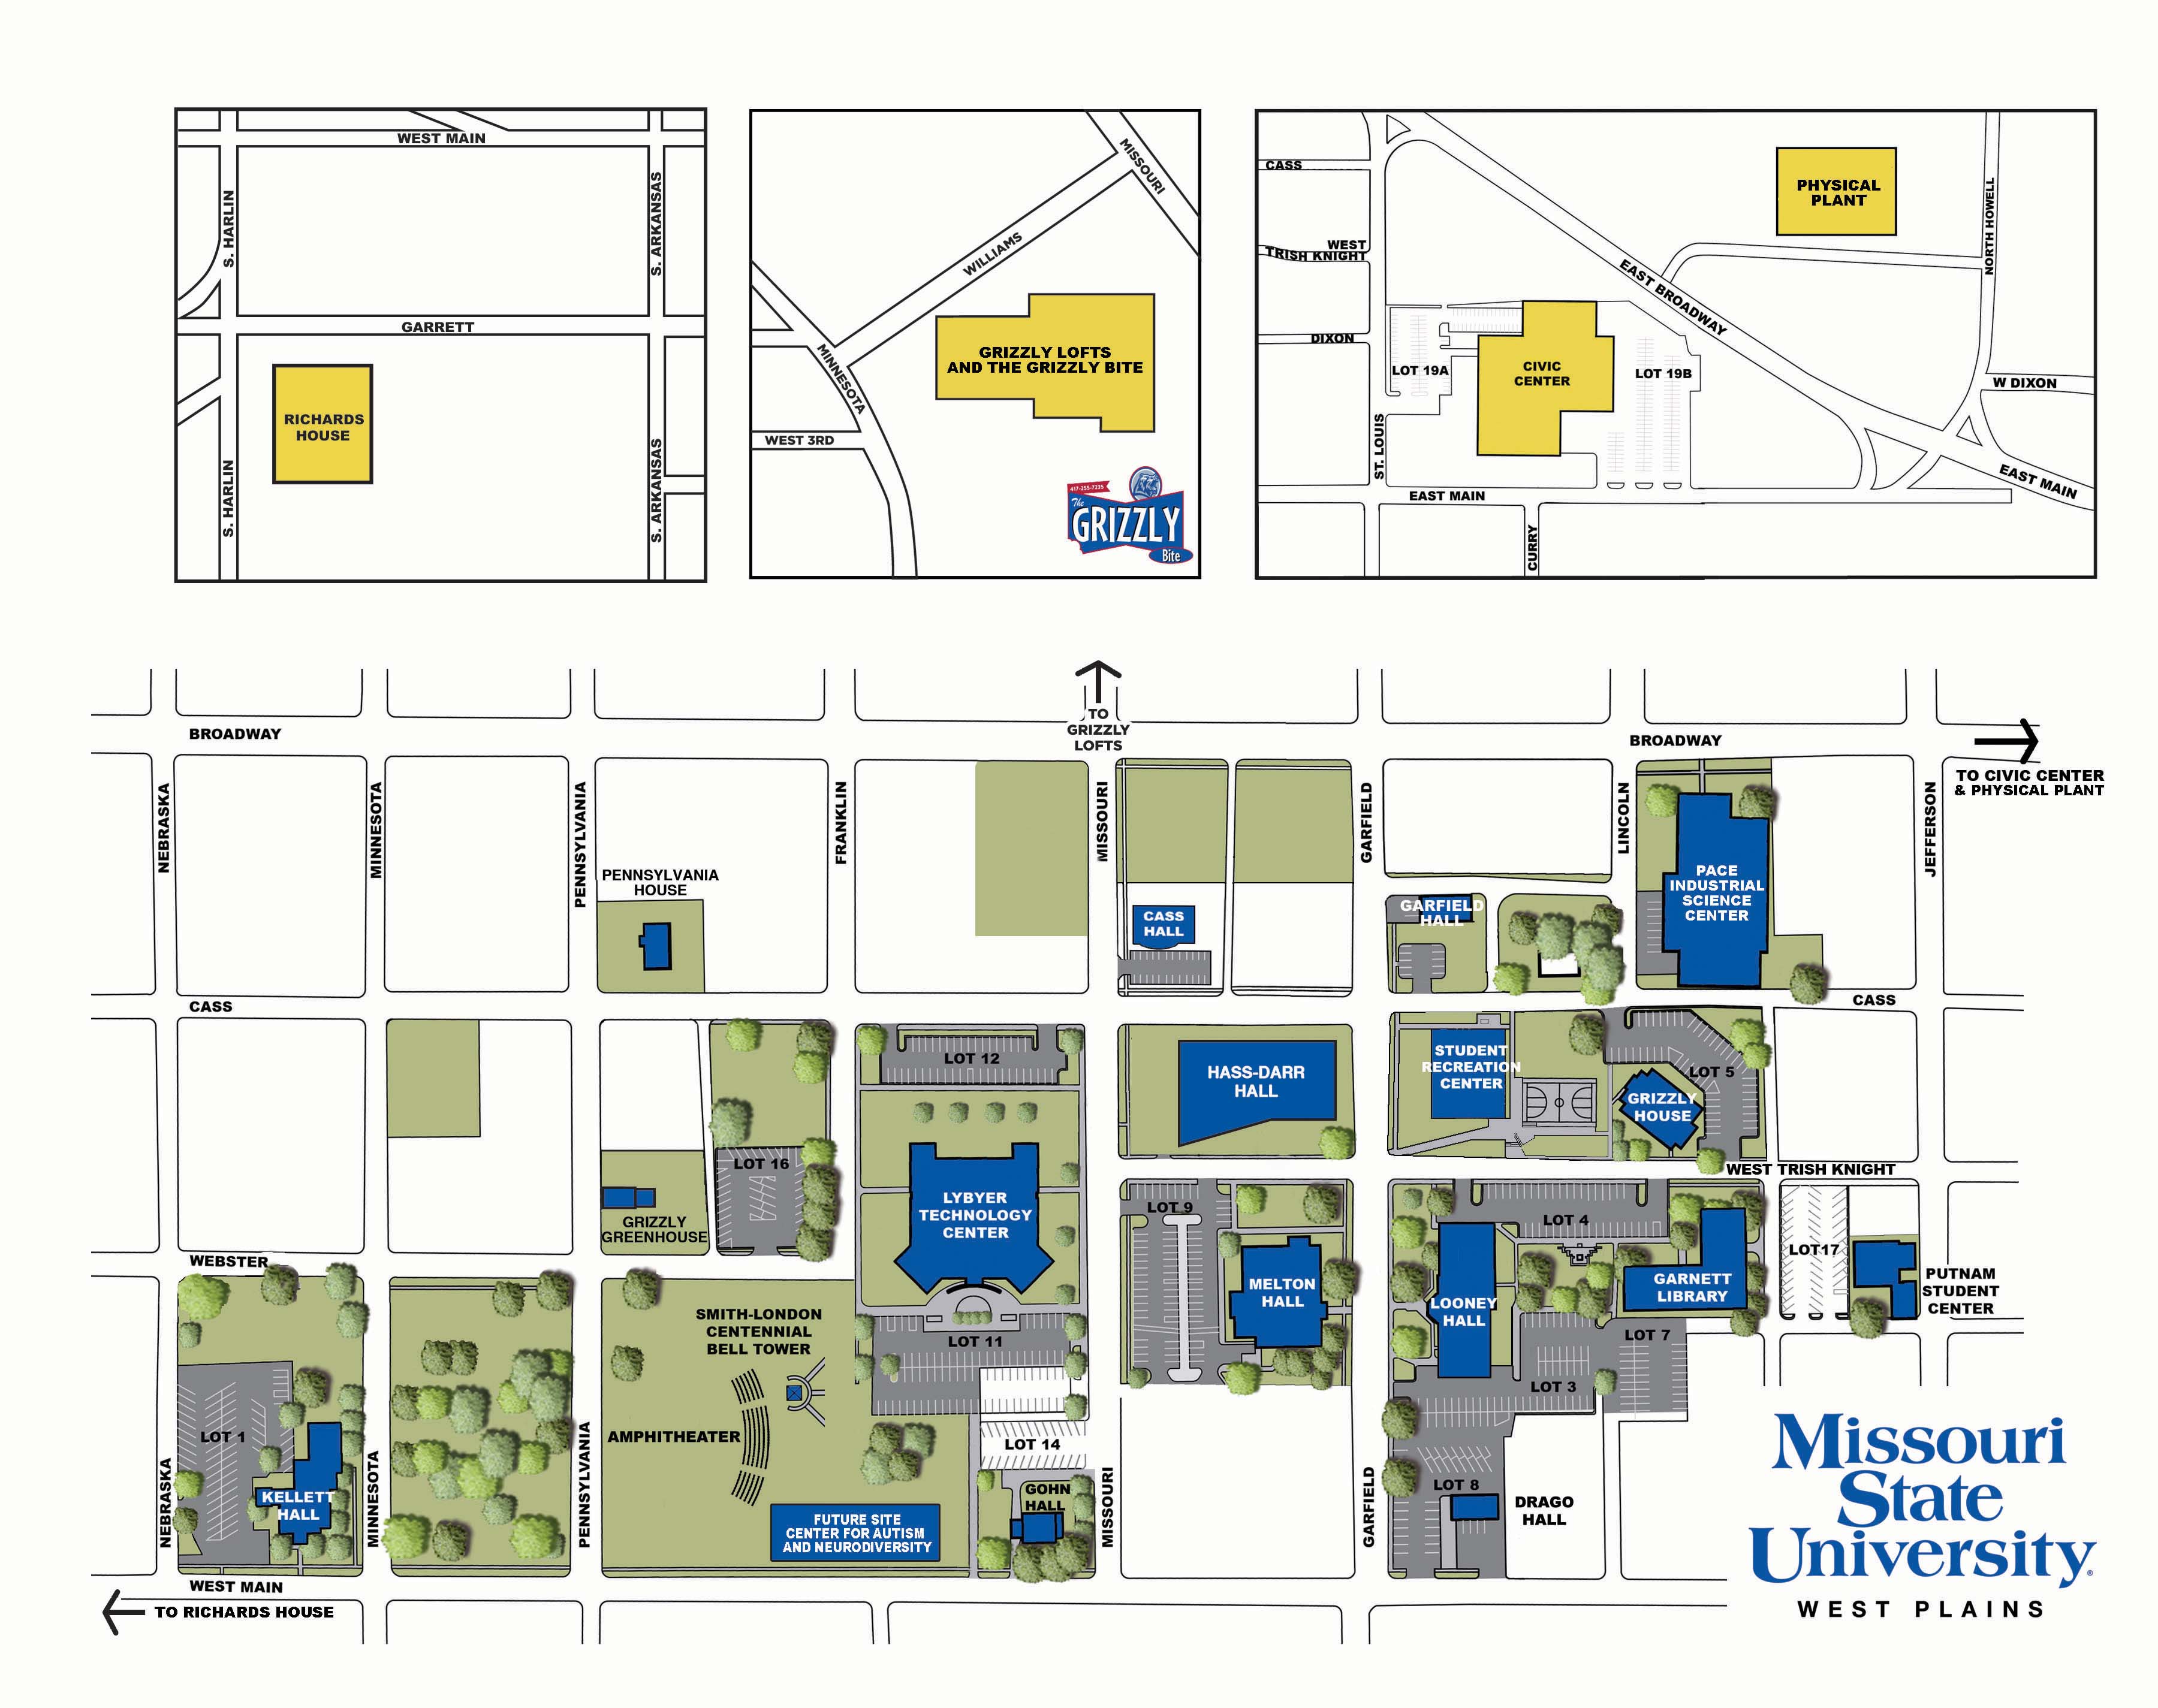 Campus map with building and street names